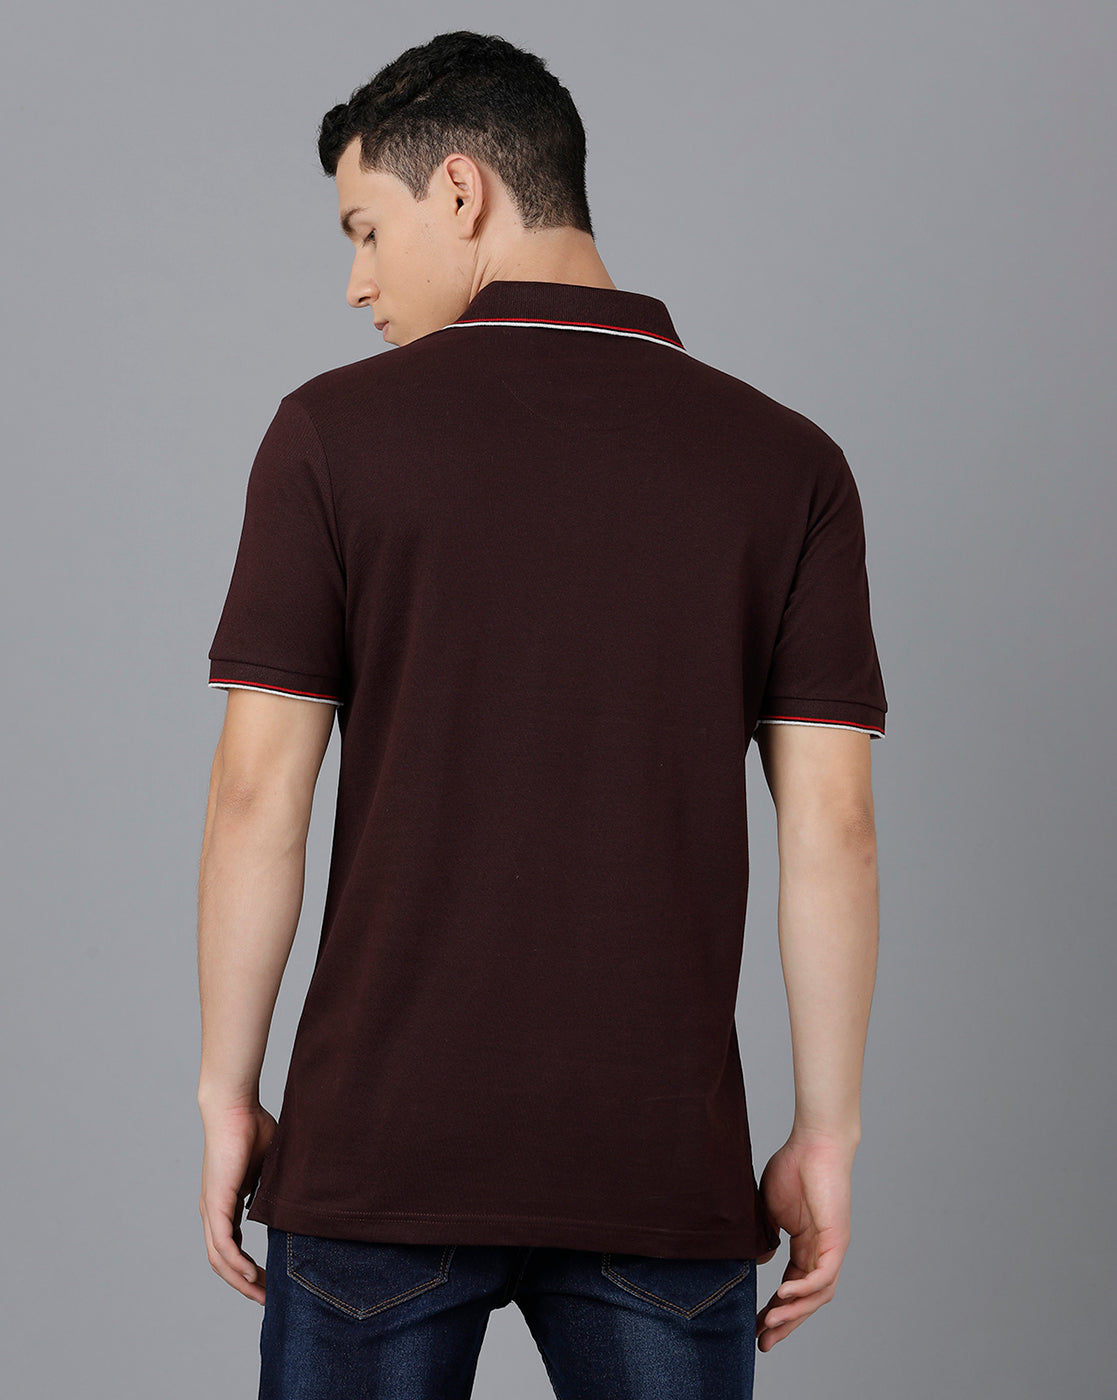 Classic Polo Mens Cotton Half Sleeve Printed Slim Fit Brown Color Polo Neck T-Shirt | Prm - 709 A